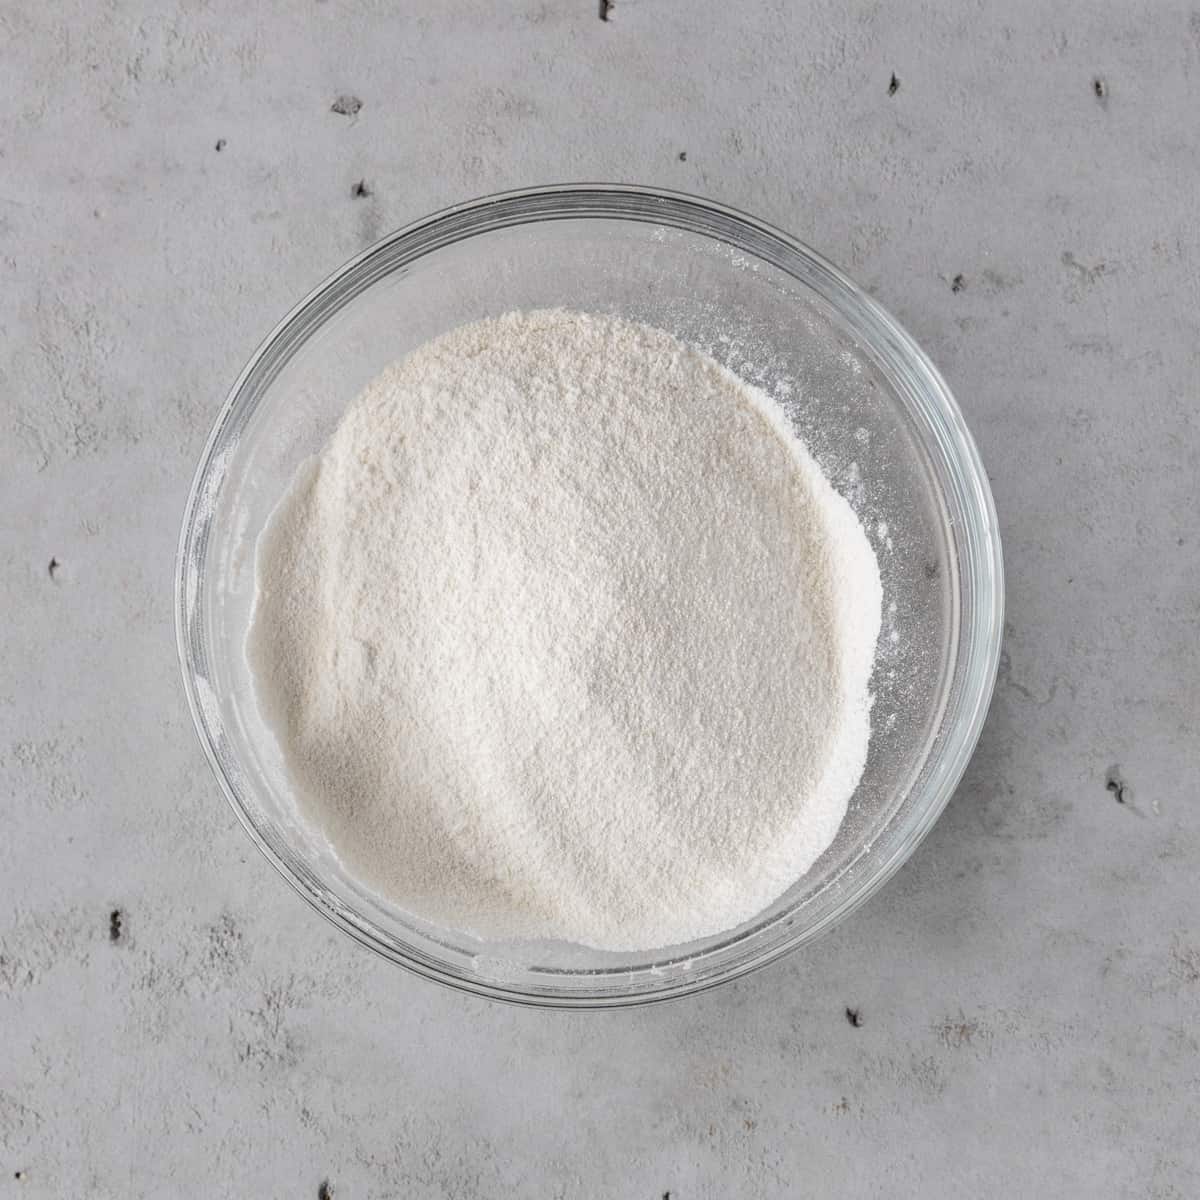 the dry ingredients in a glass bowl on a grey background